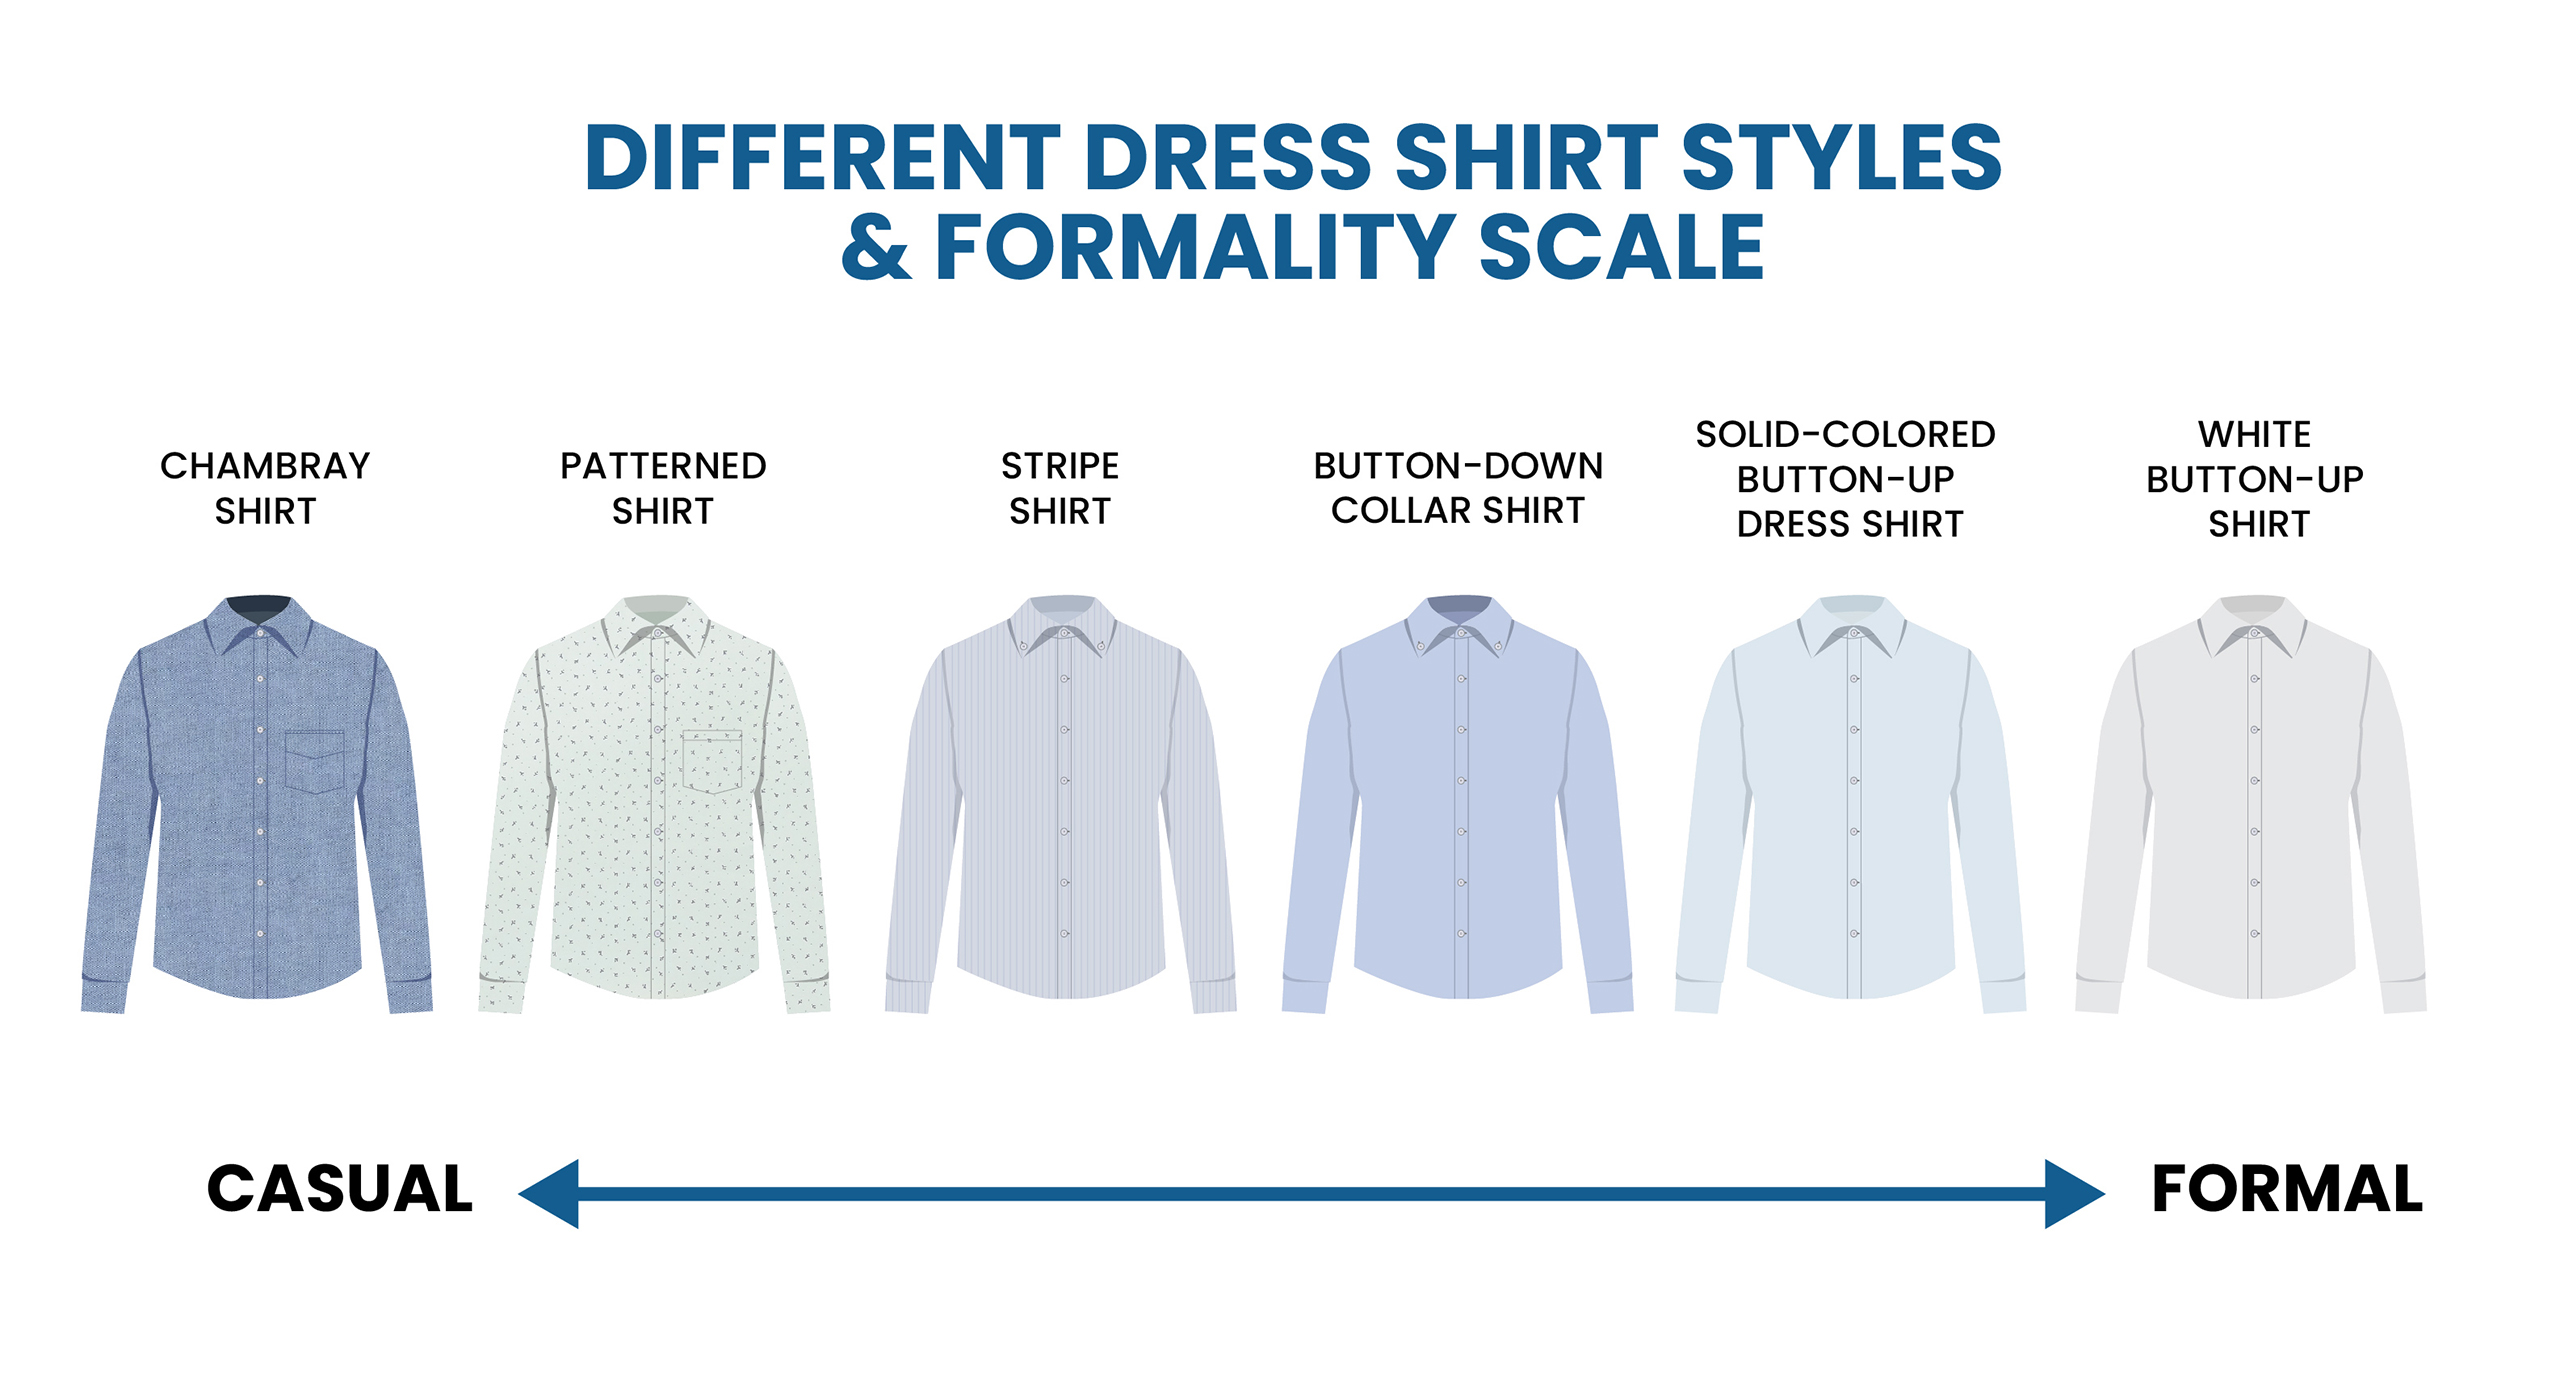 dress shirt types for men: formality scale